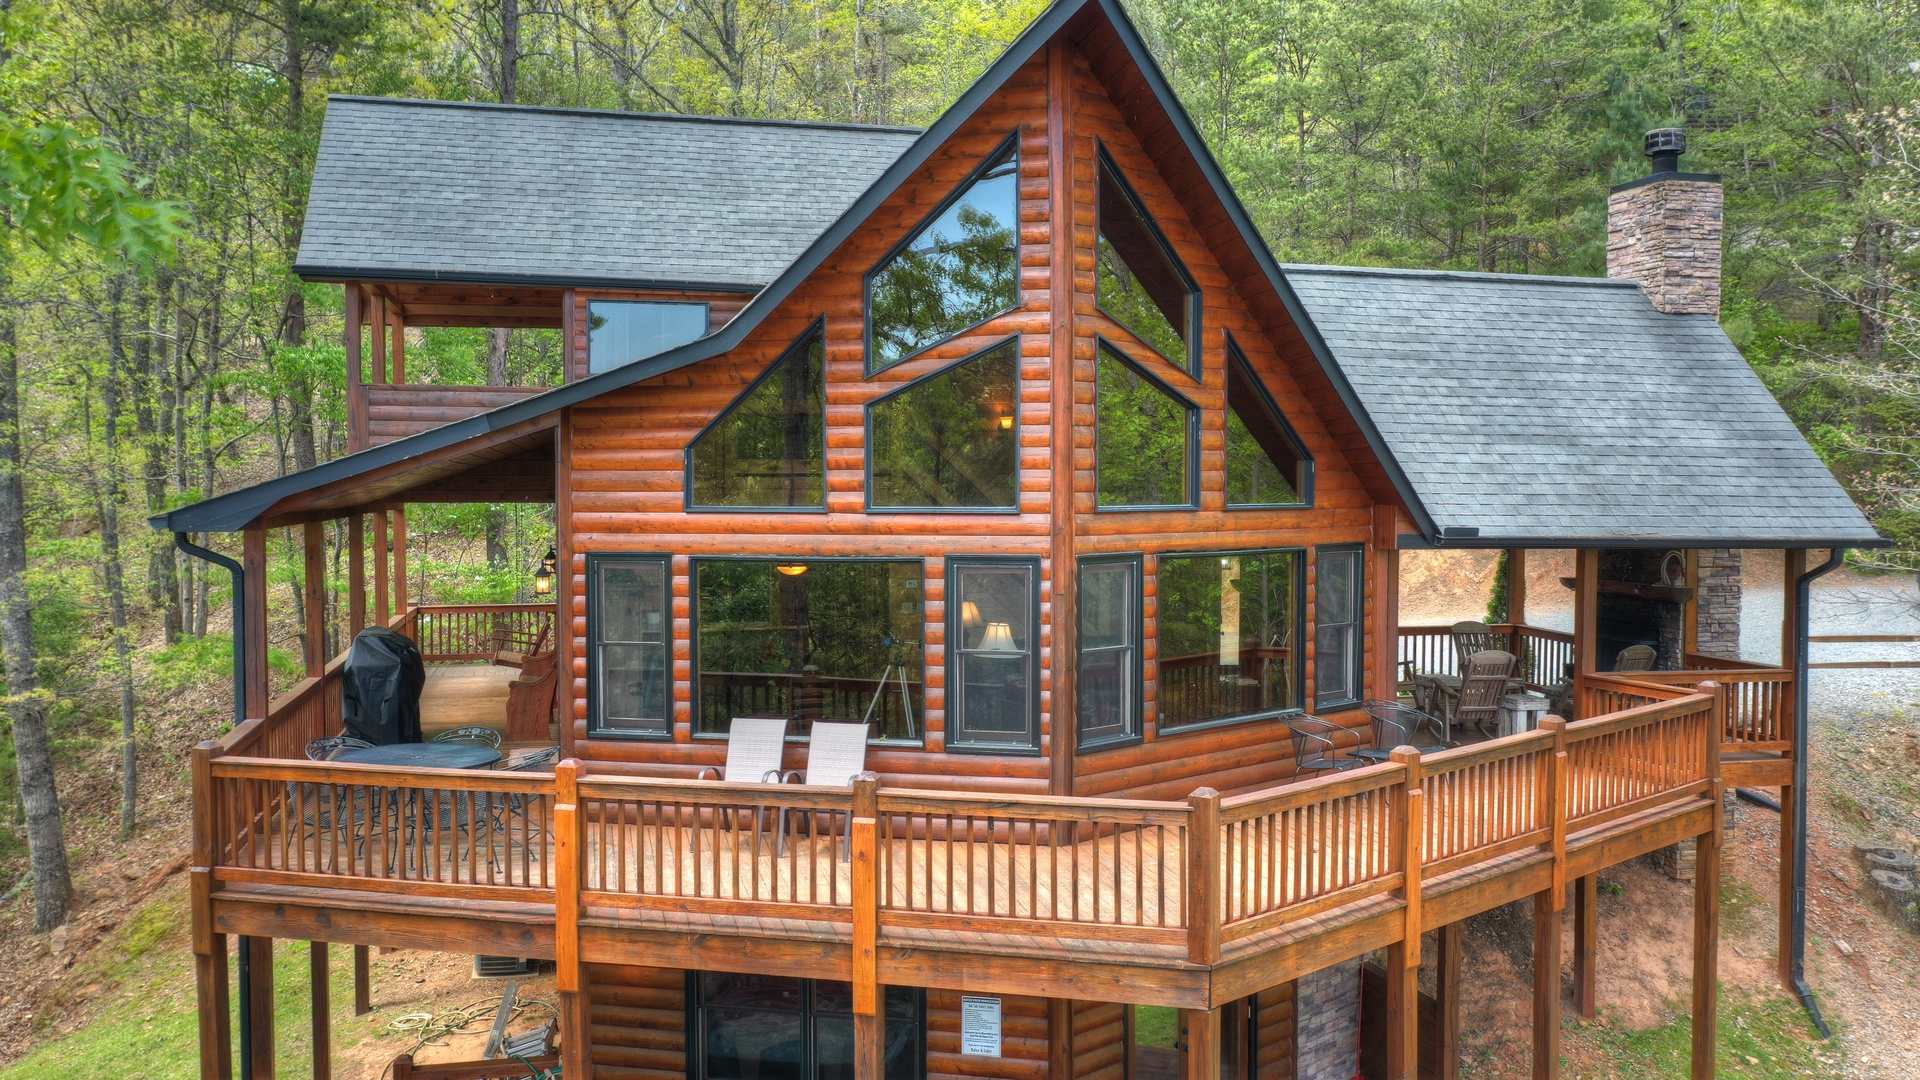 Aska Lodge- Upper deck view with spacious windows